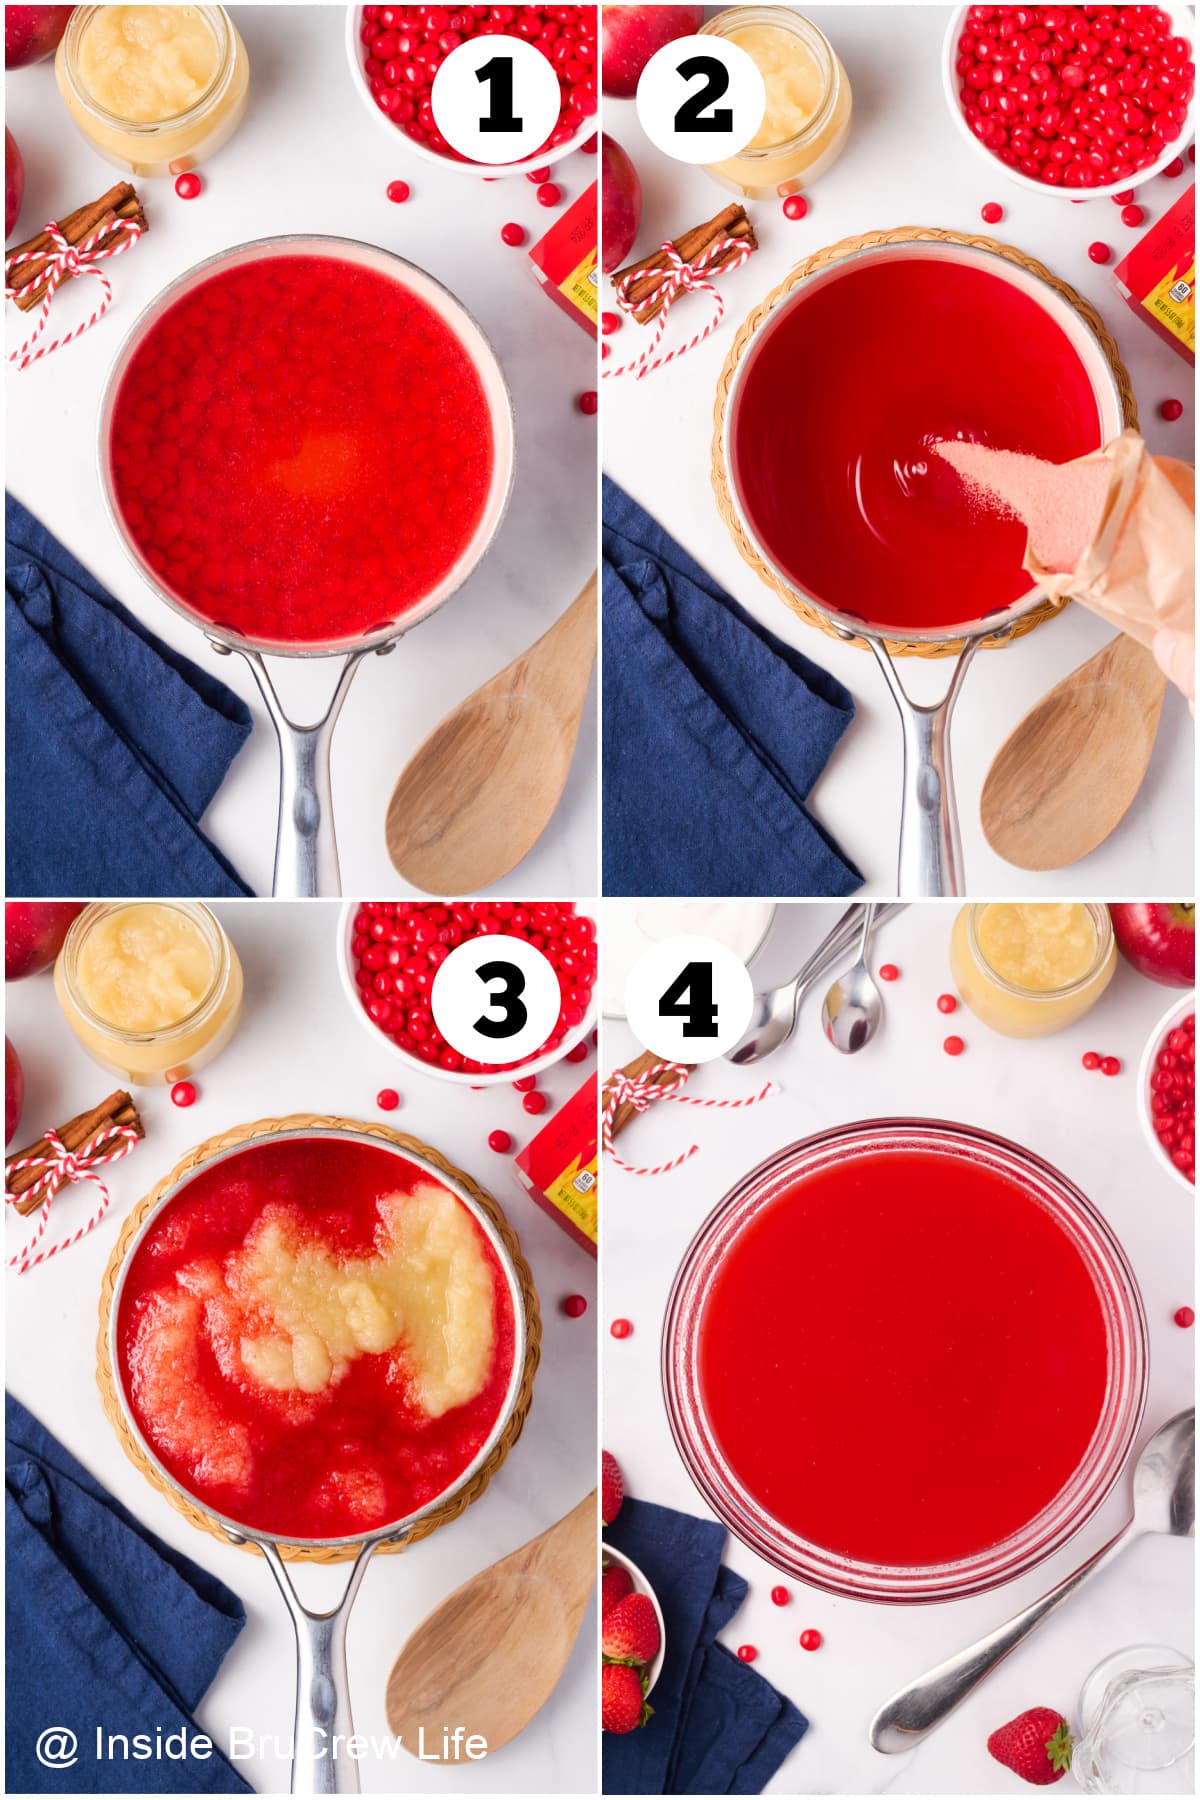 Four pictures collaged together showing how to make cinnamon applesauce Jello.